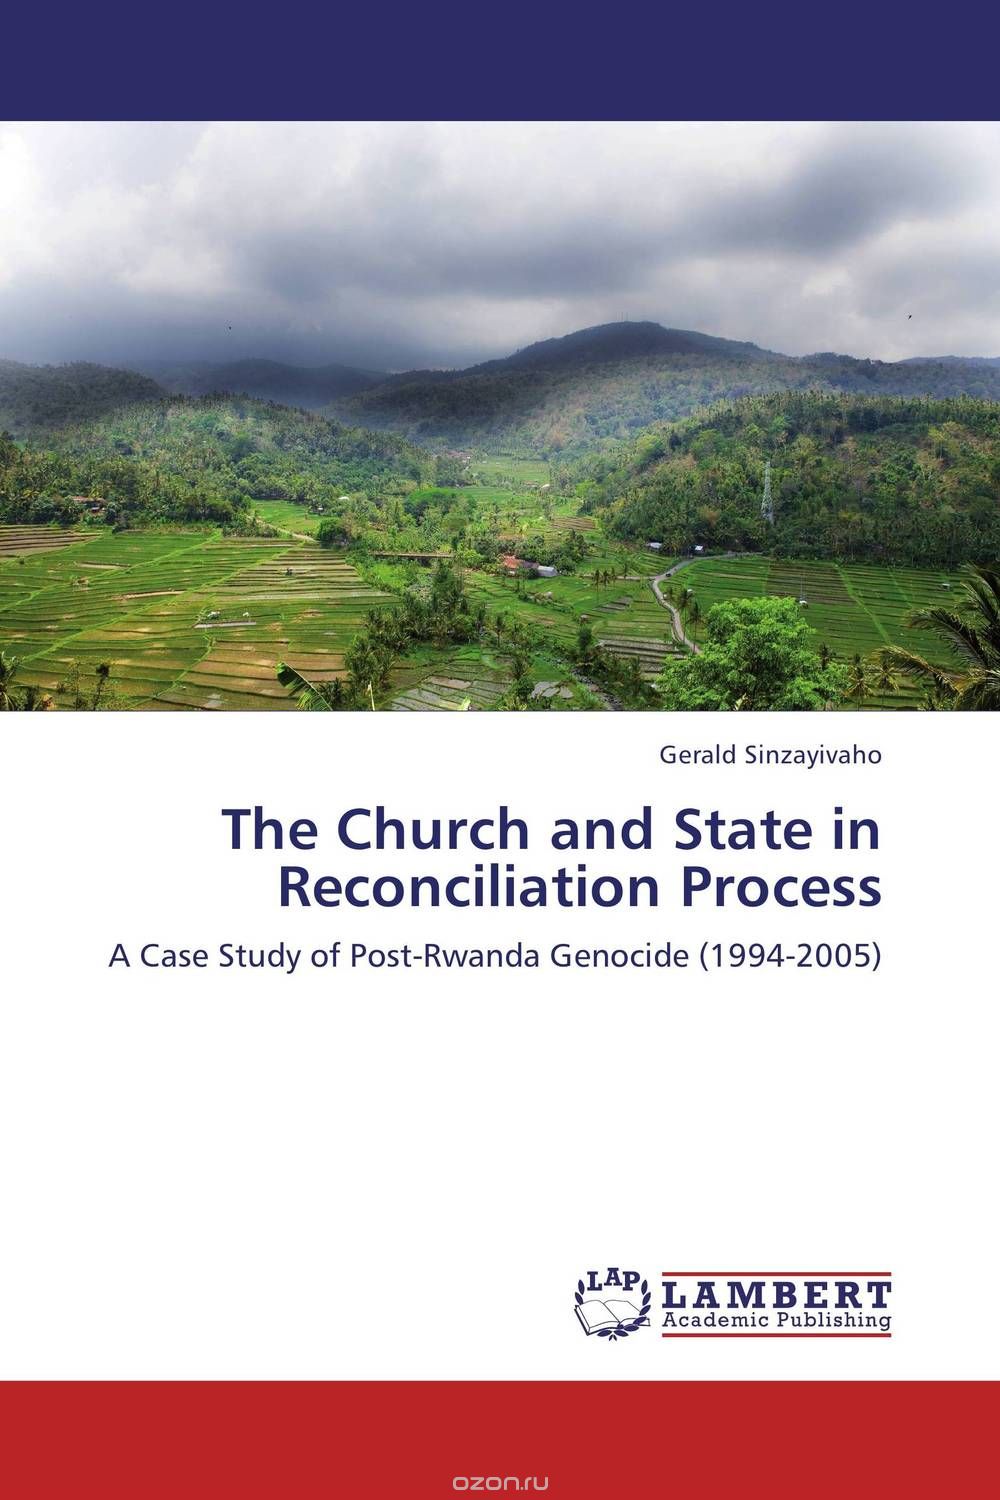 Скачать книгу "The Church and State in Reconciliation Process"